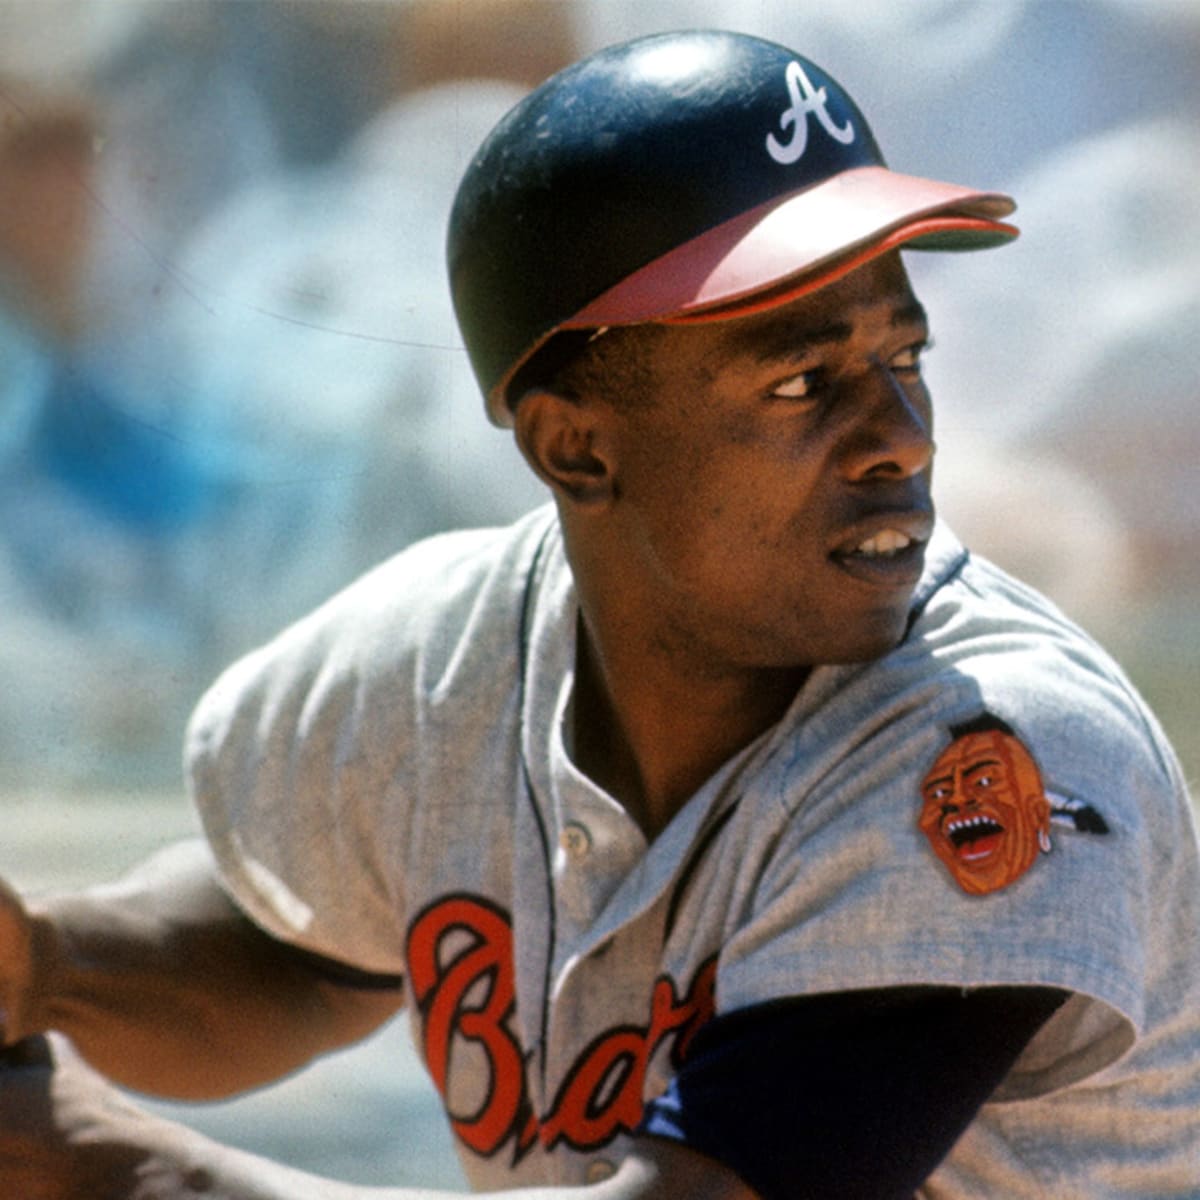 A look at Hank Aaron's career and accomplishments